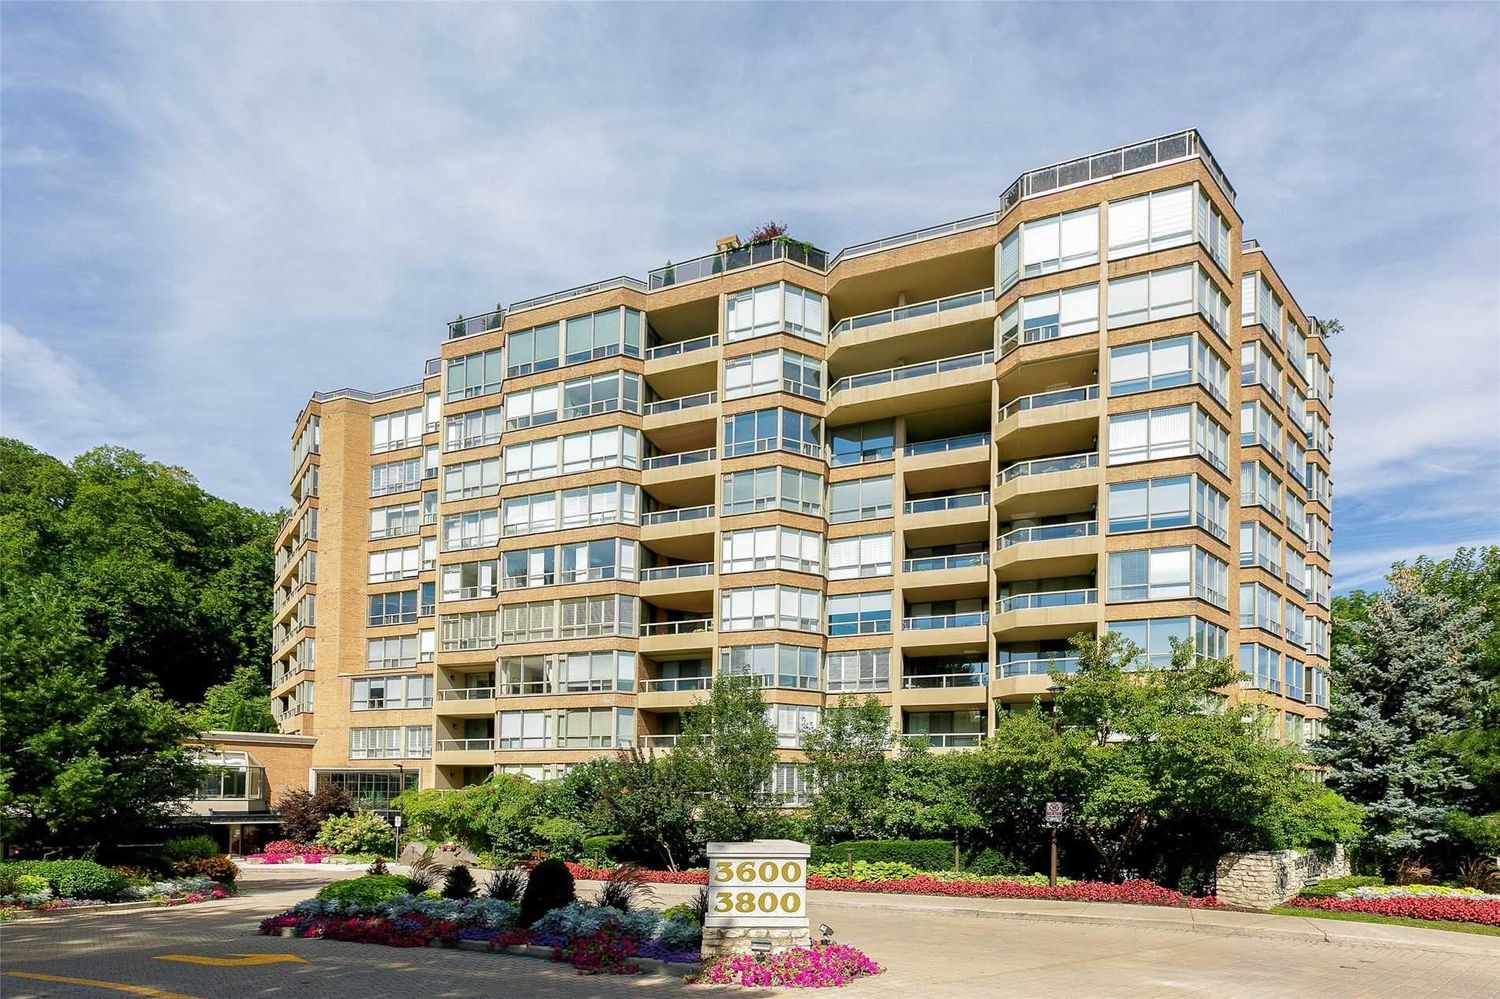 3800 Yonge Street. Governor's Hill I Condos is located in  North York, Toronto - image #2 of 3